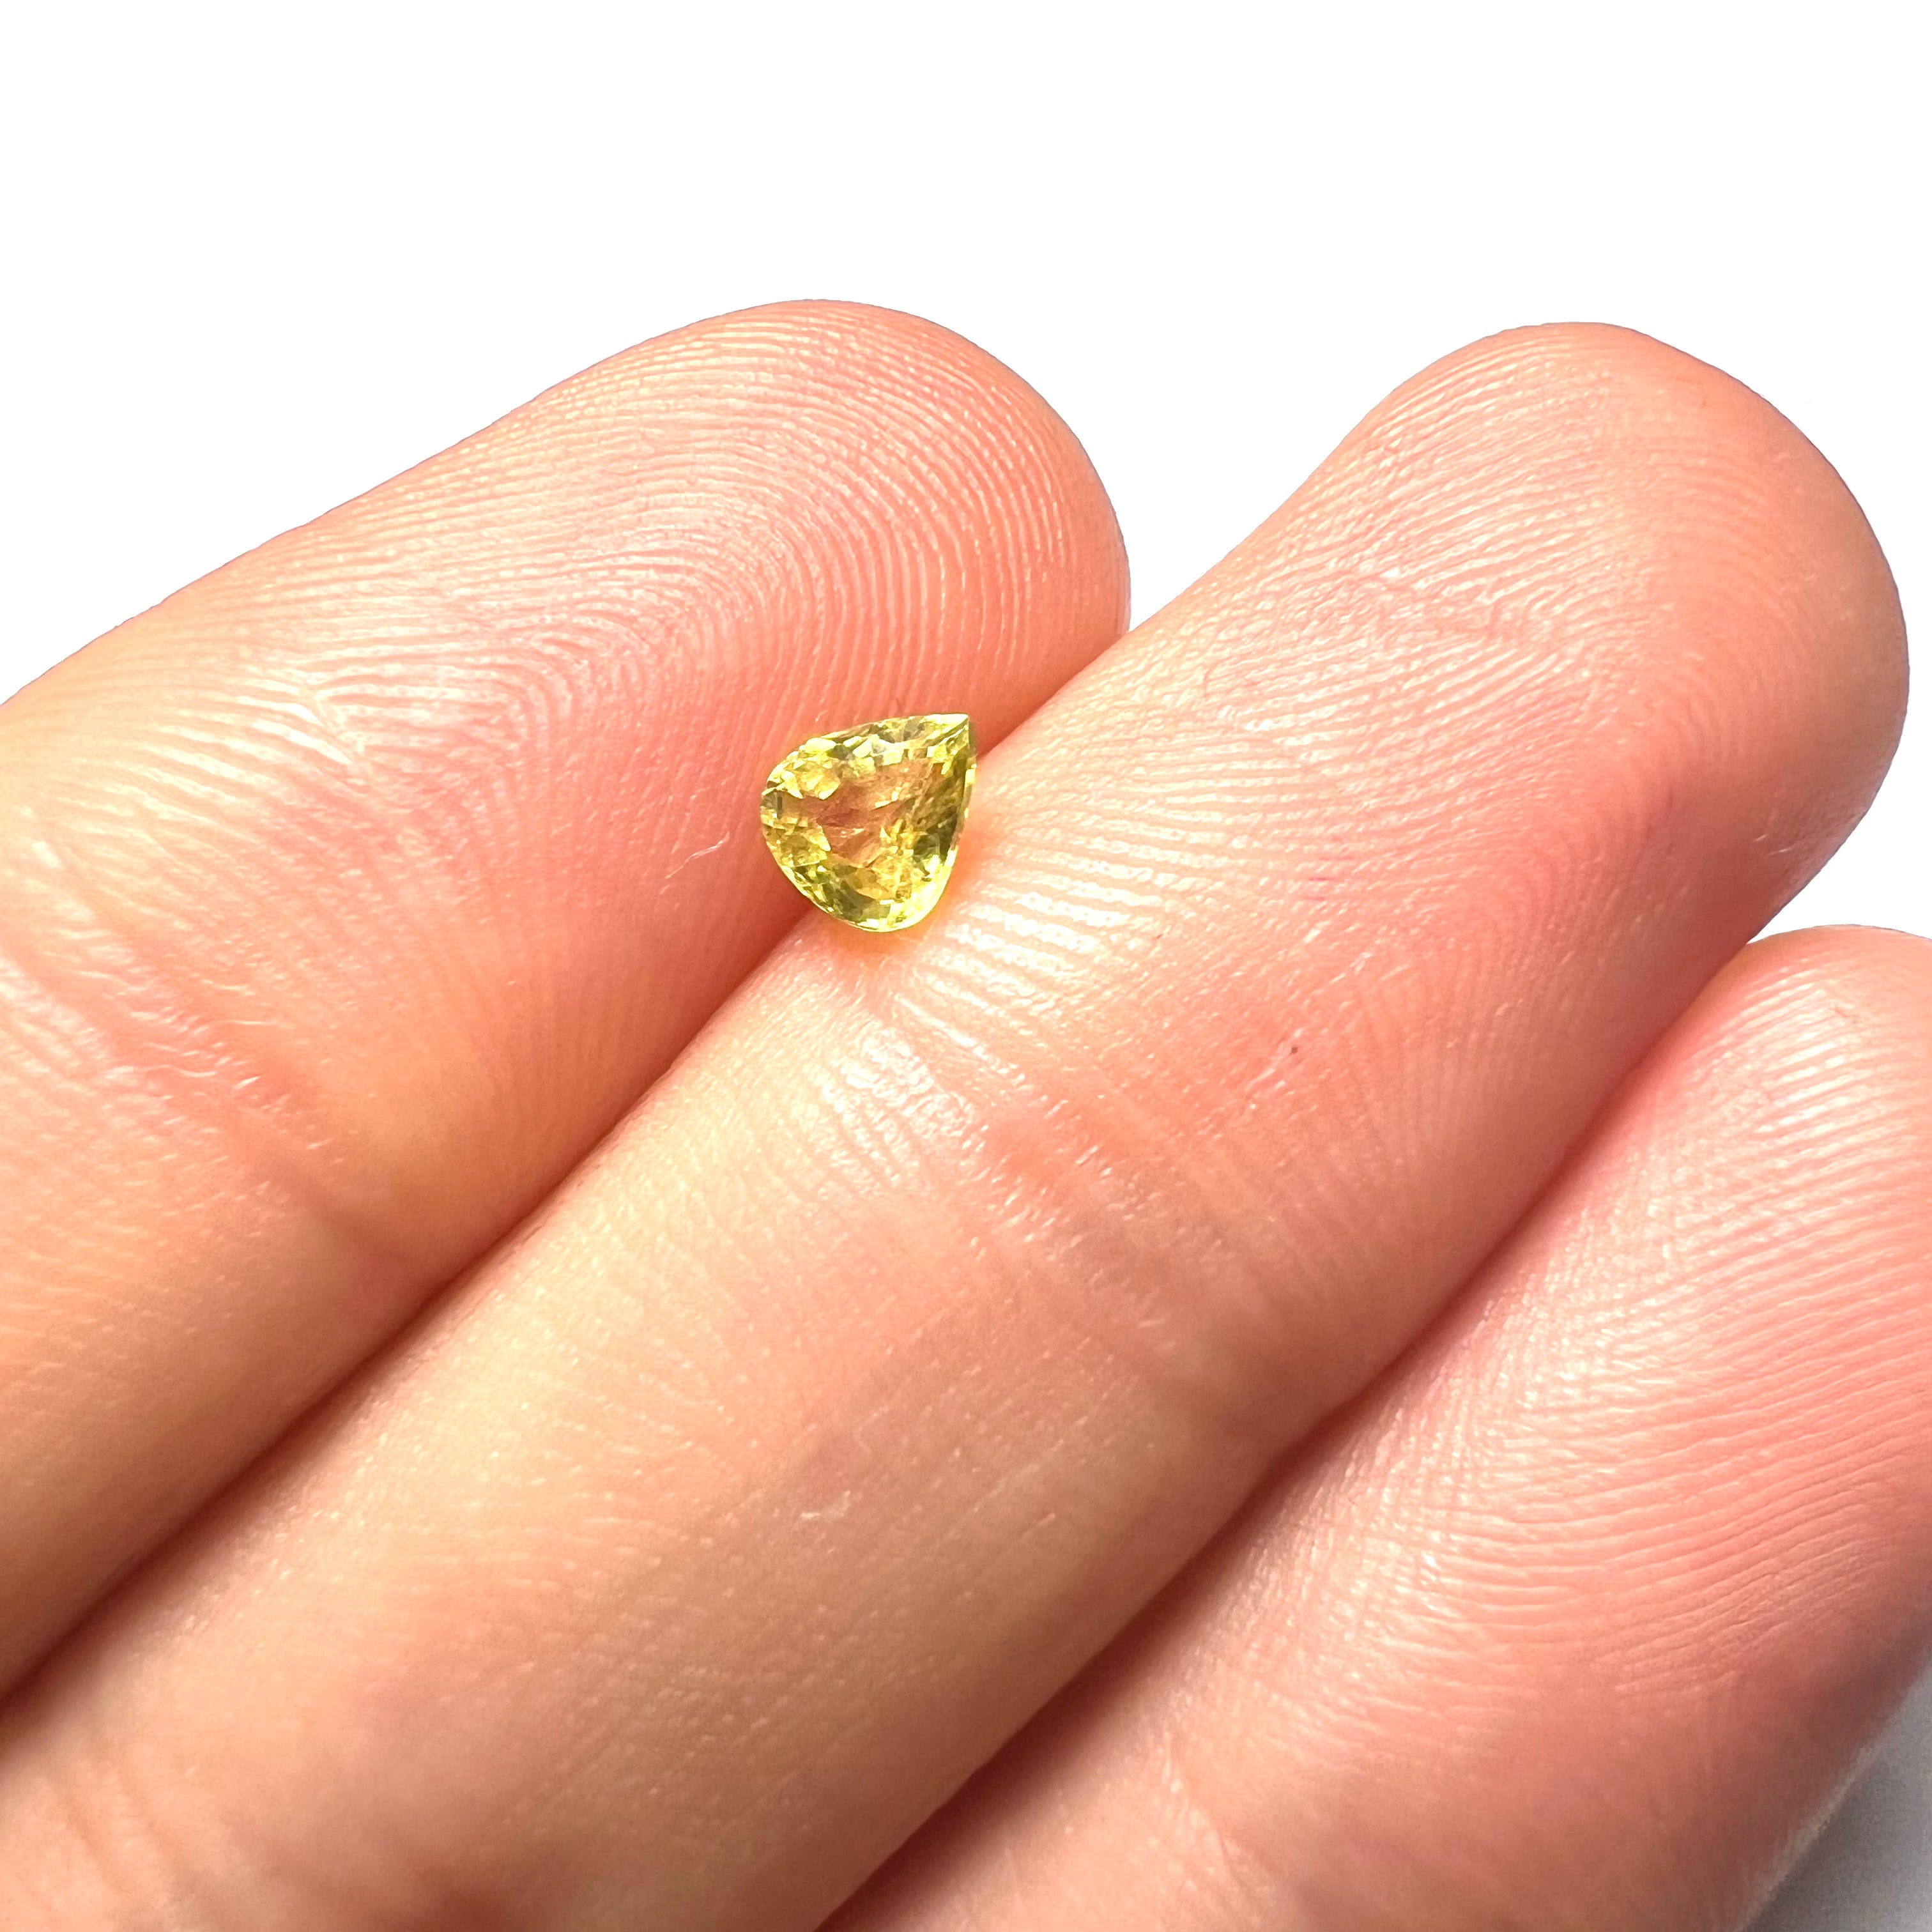 .50CT Loose Pear Yellow Sapphire 6.01x5.03x3.01mm Earth mined Gemstone